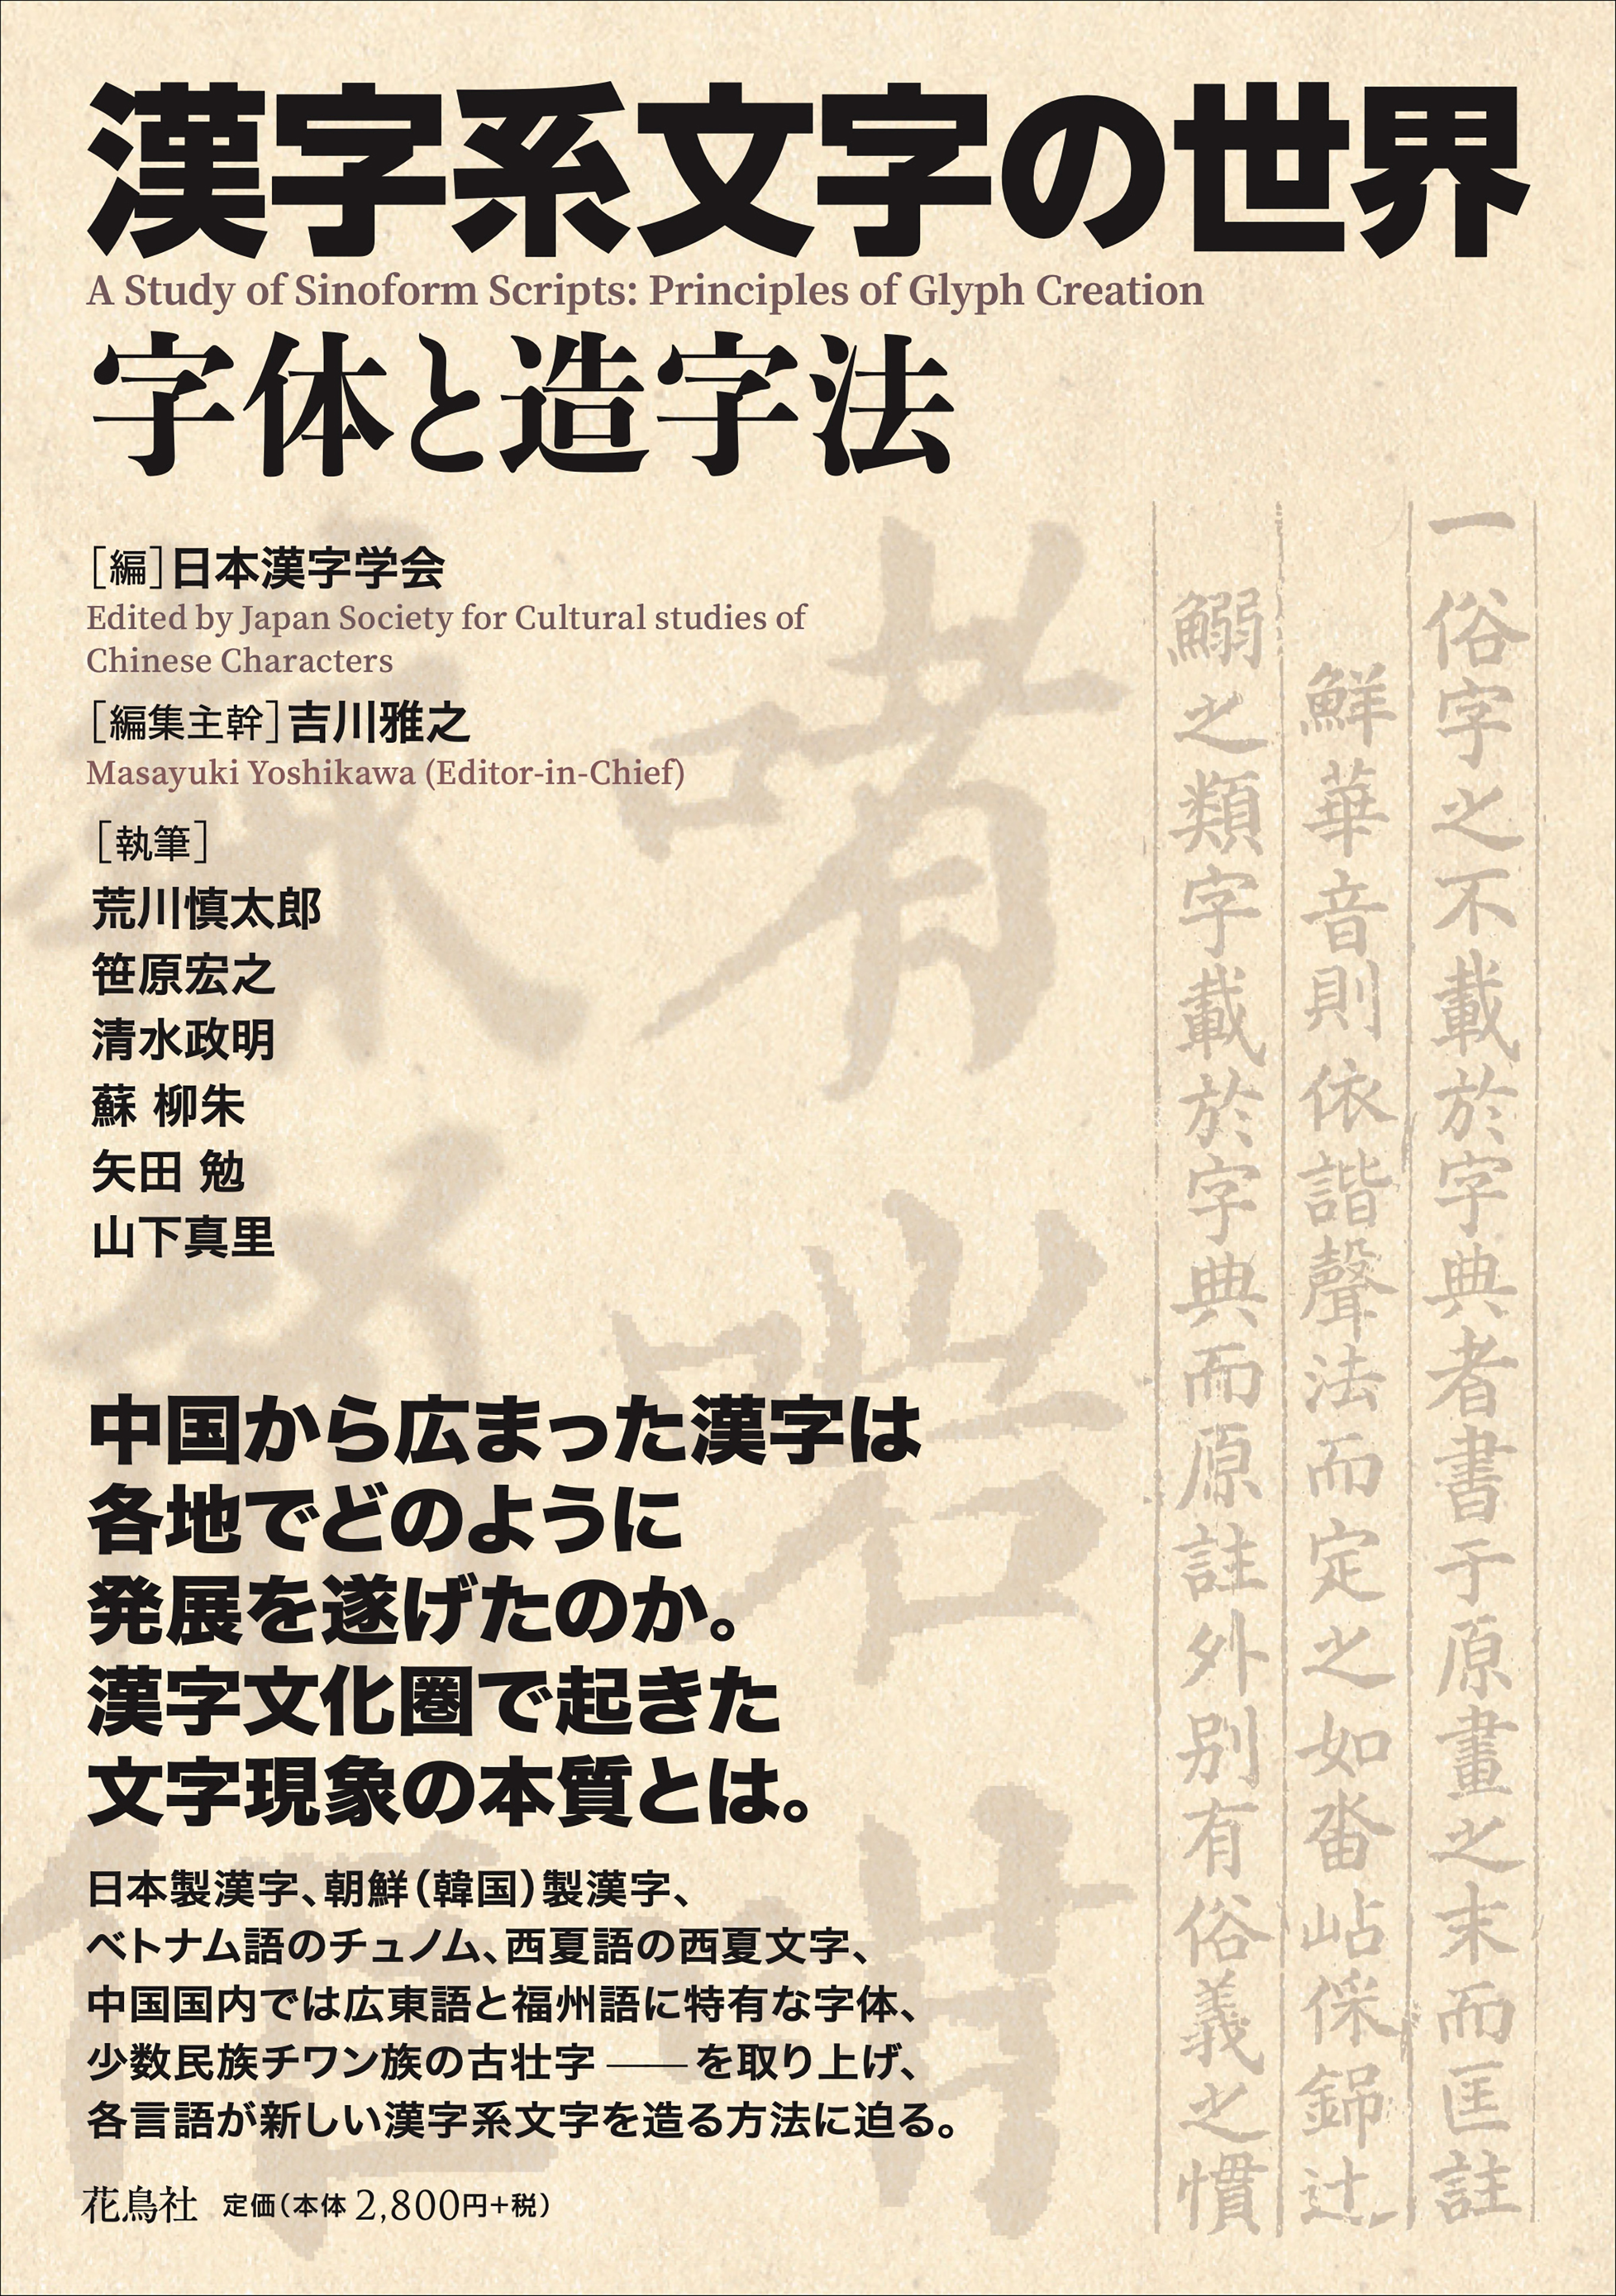 A pale brawn cover giving the impression of old paper with the title and book descriptions in black and Chinese sentences in transparent